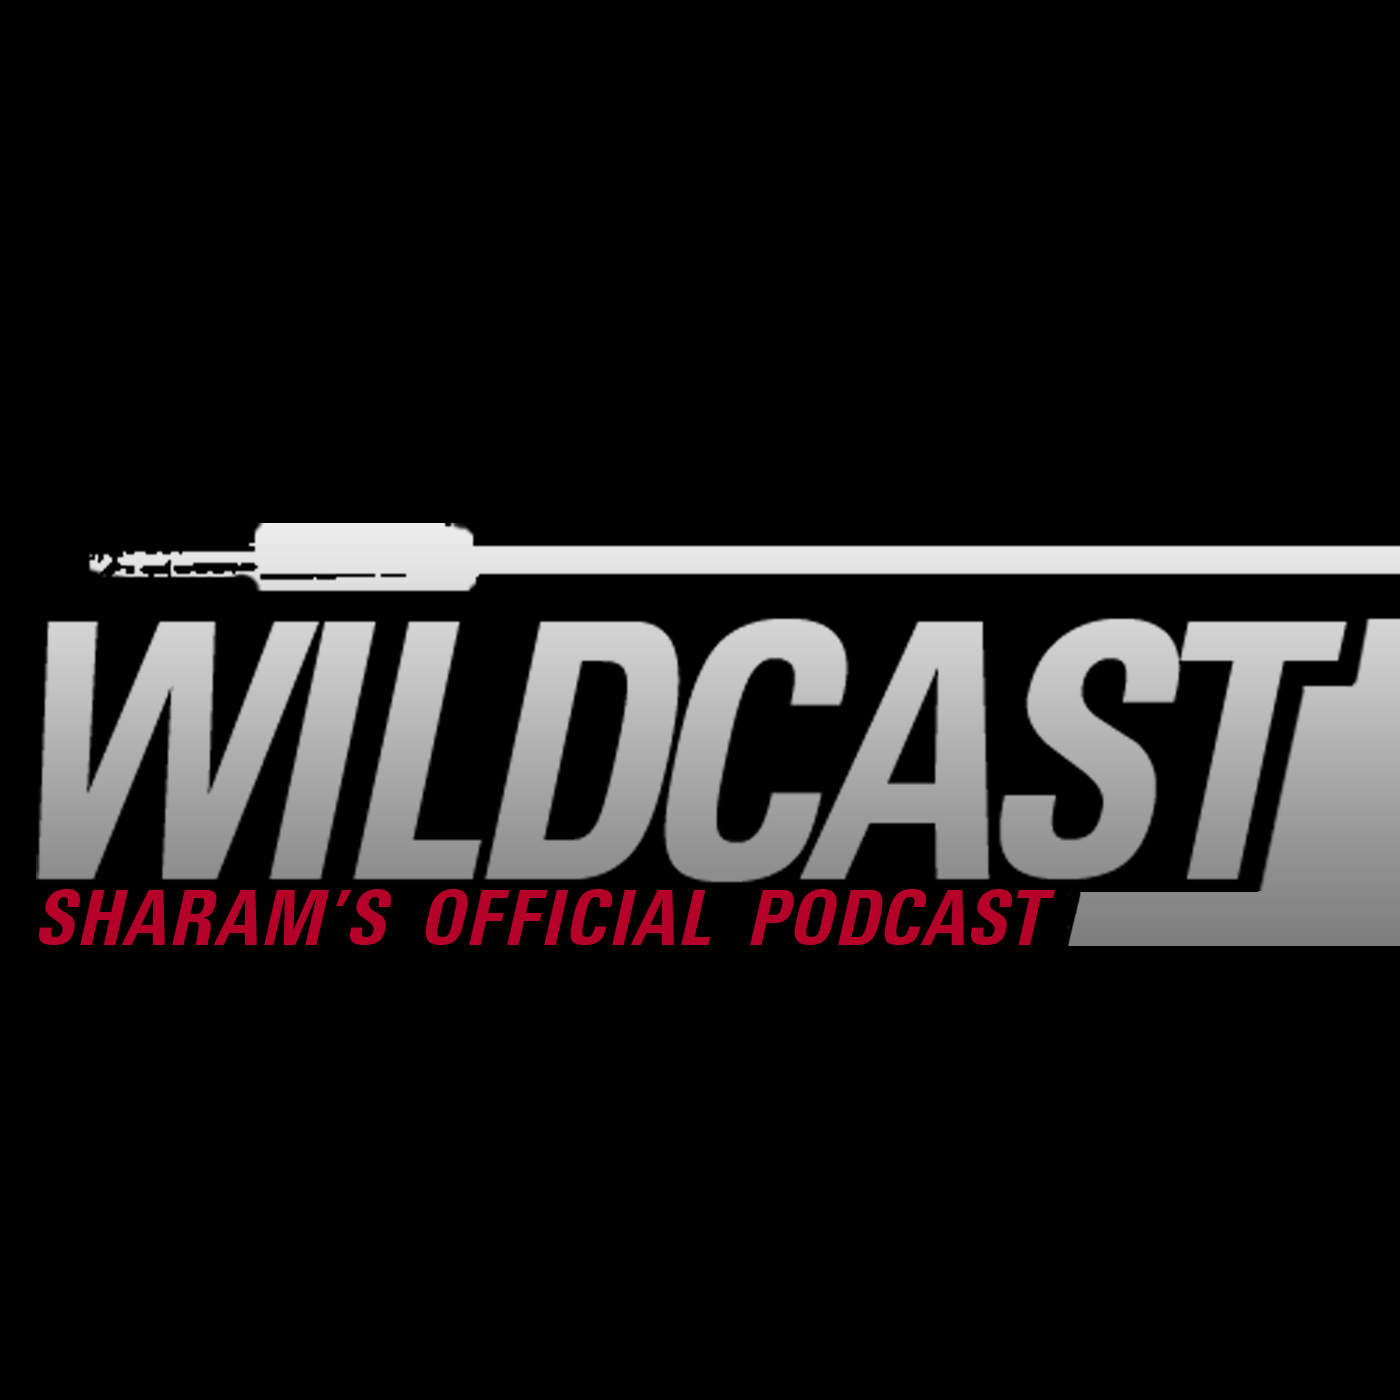 WILDCAST EPISODE 40 - Sharam's Official Podcast